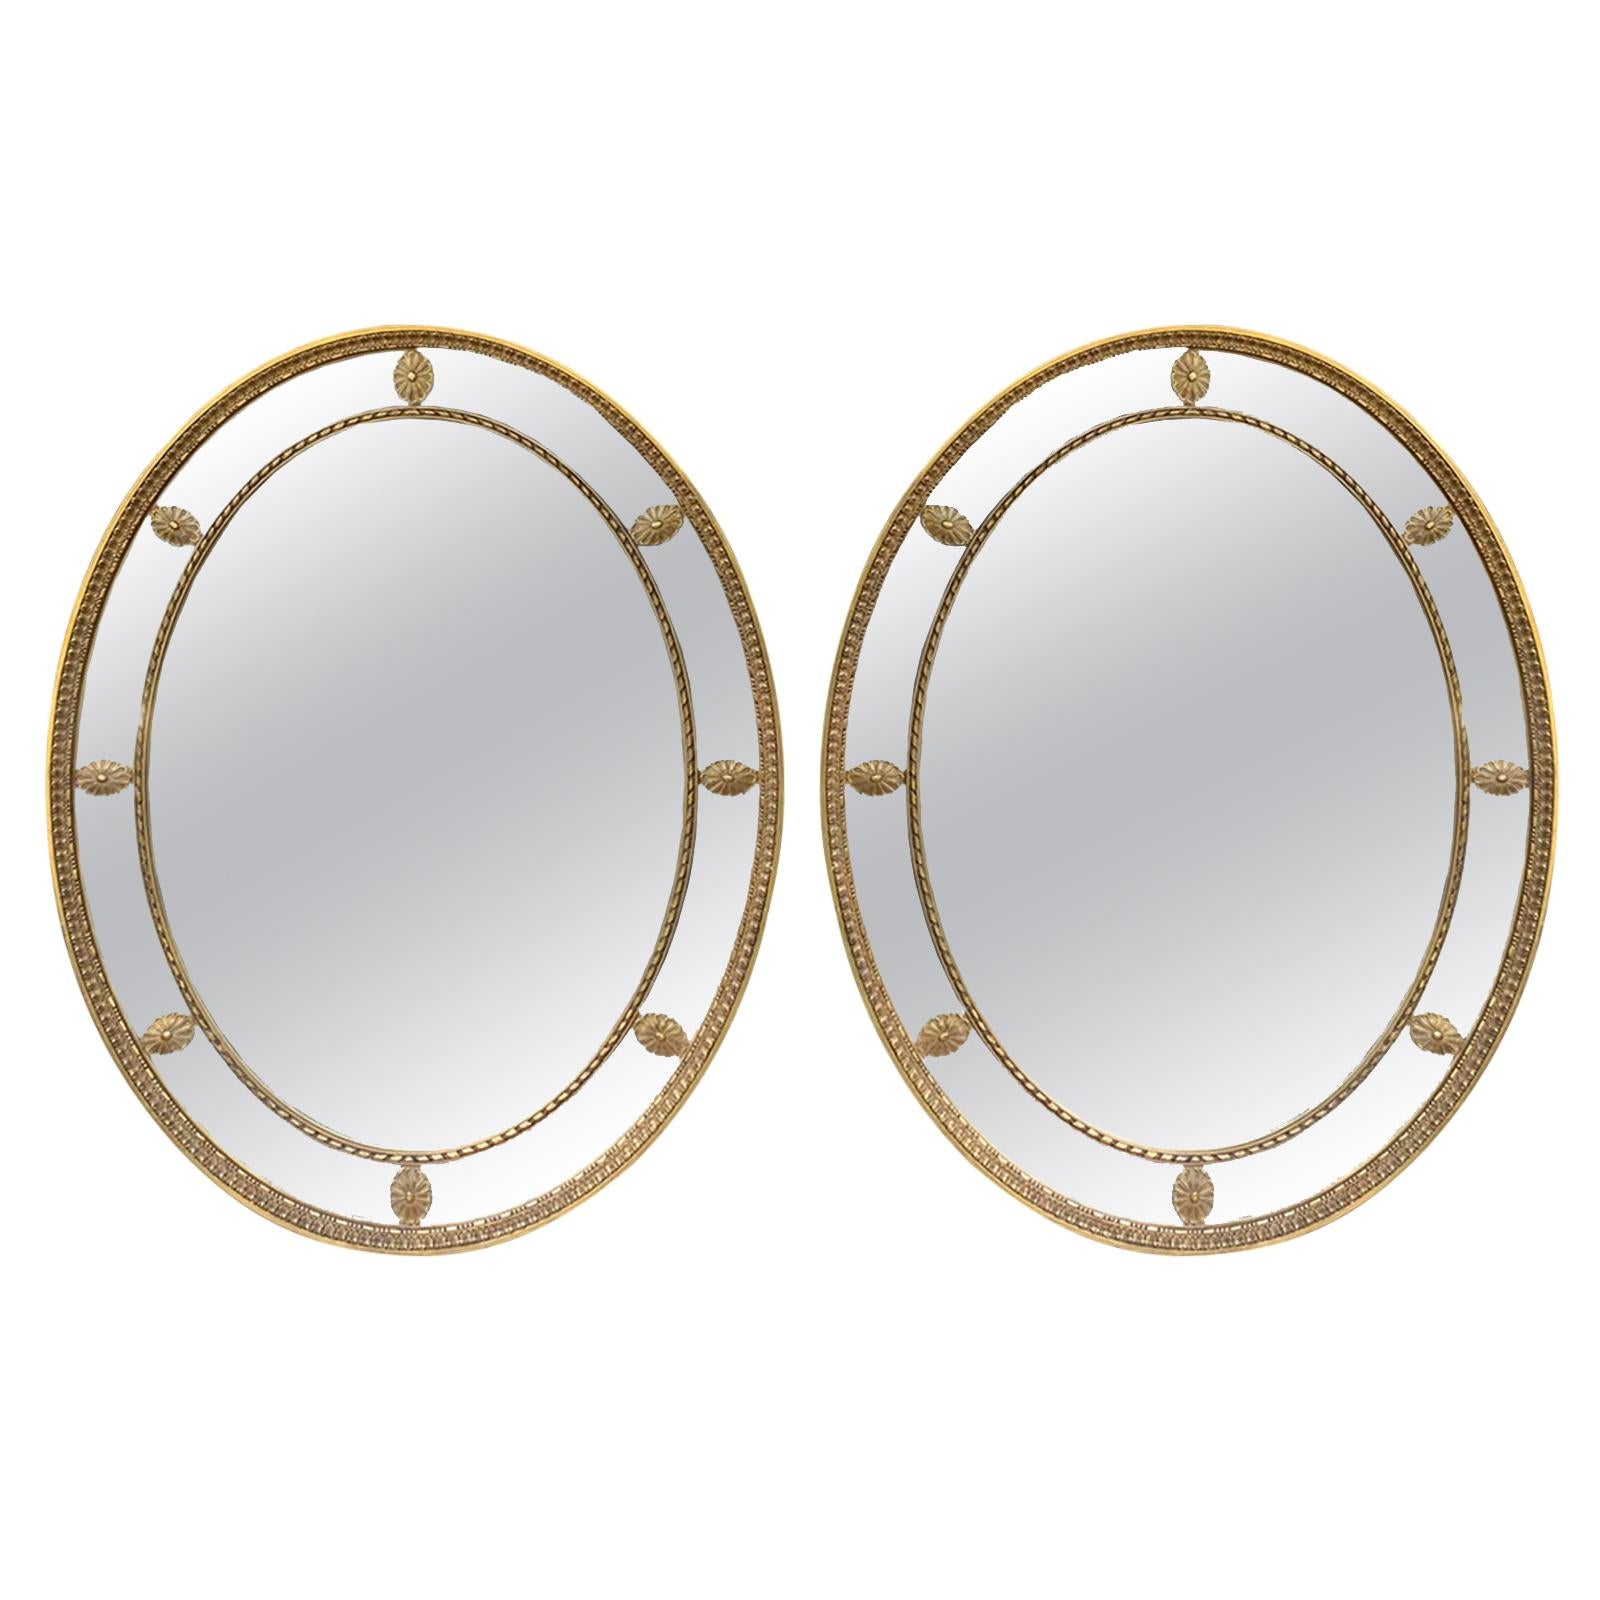 Pair of Mid-20th Century Oval Giltwood George III Style Oval Mirrors circa 1970s